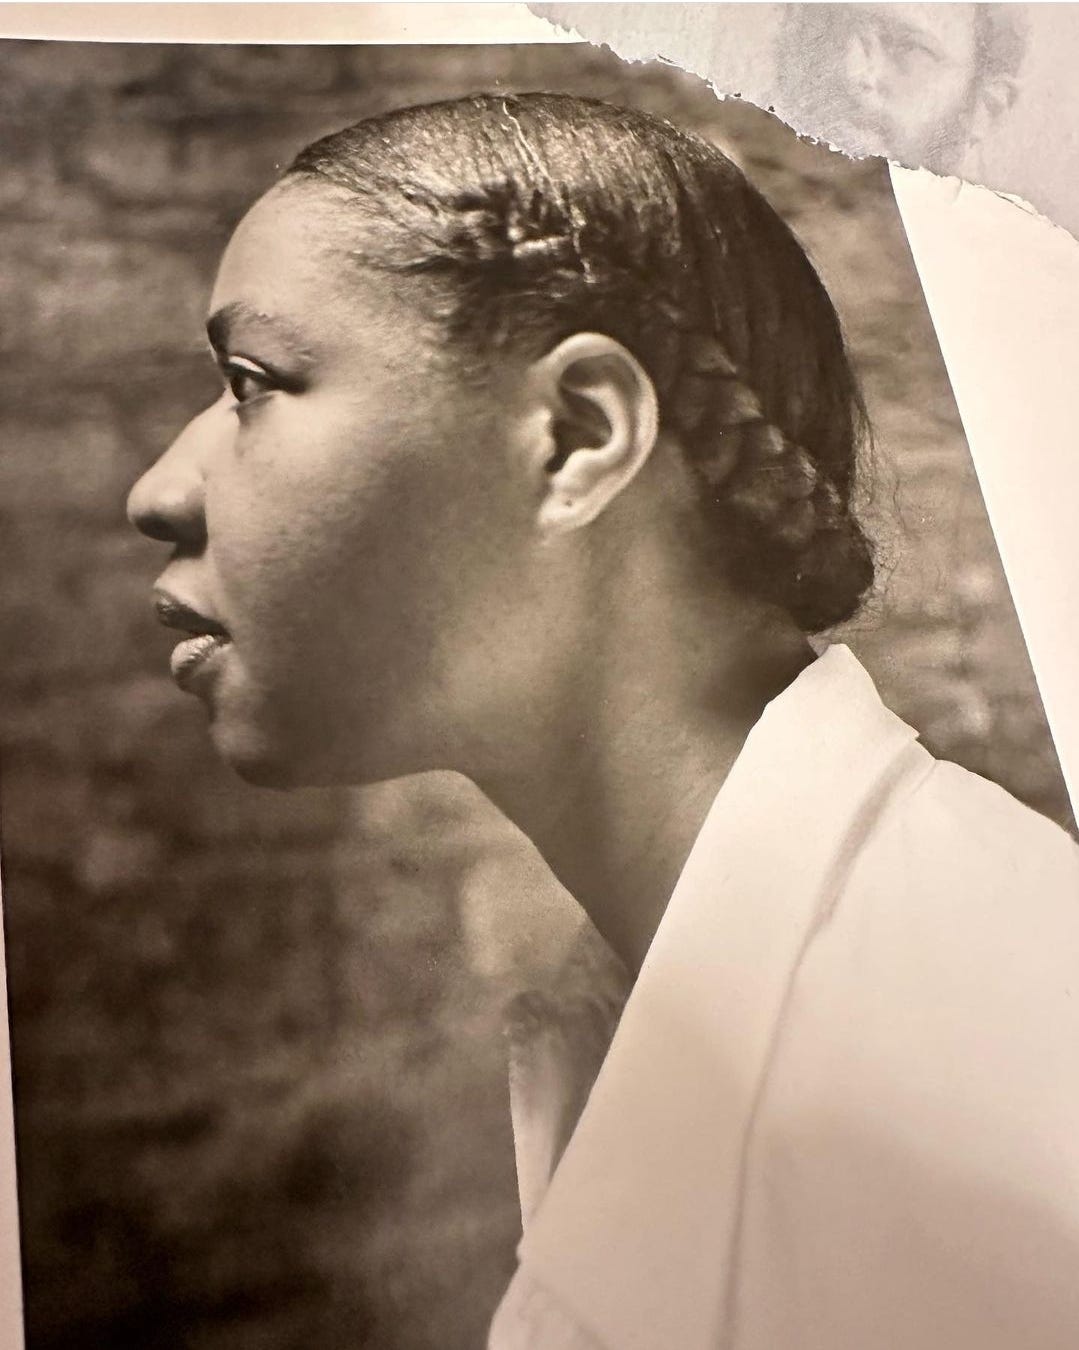 A black and white photo of a younger Jamaica Kincaid in profile. Her hair is straightened in a side braid, wearing a white blouse.